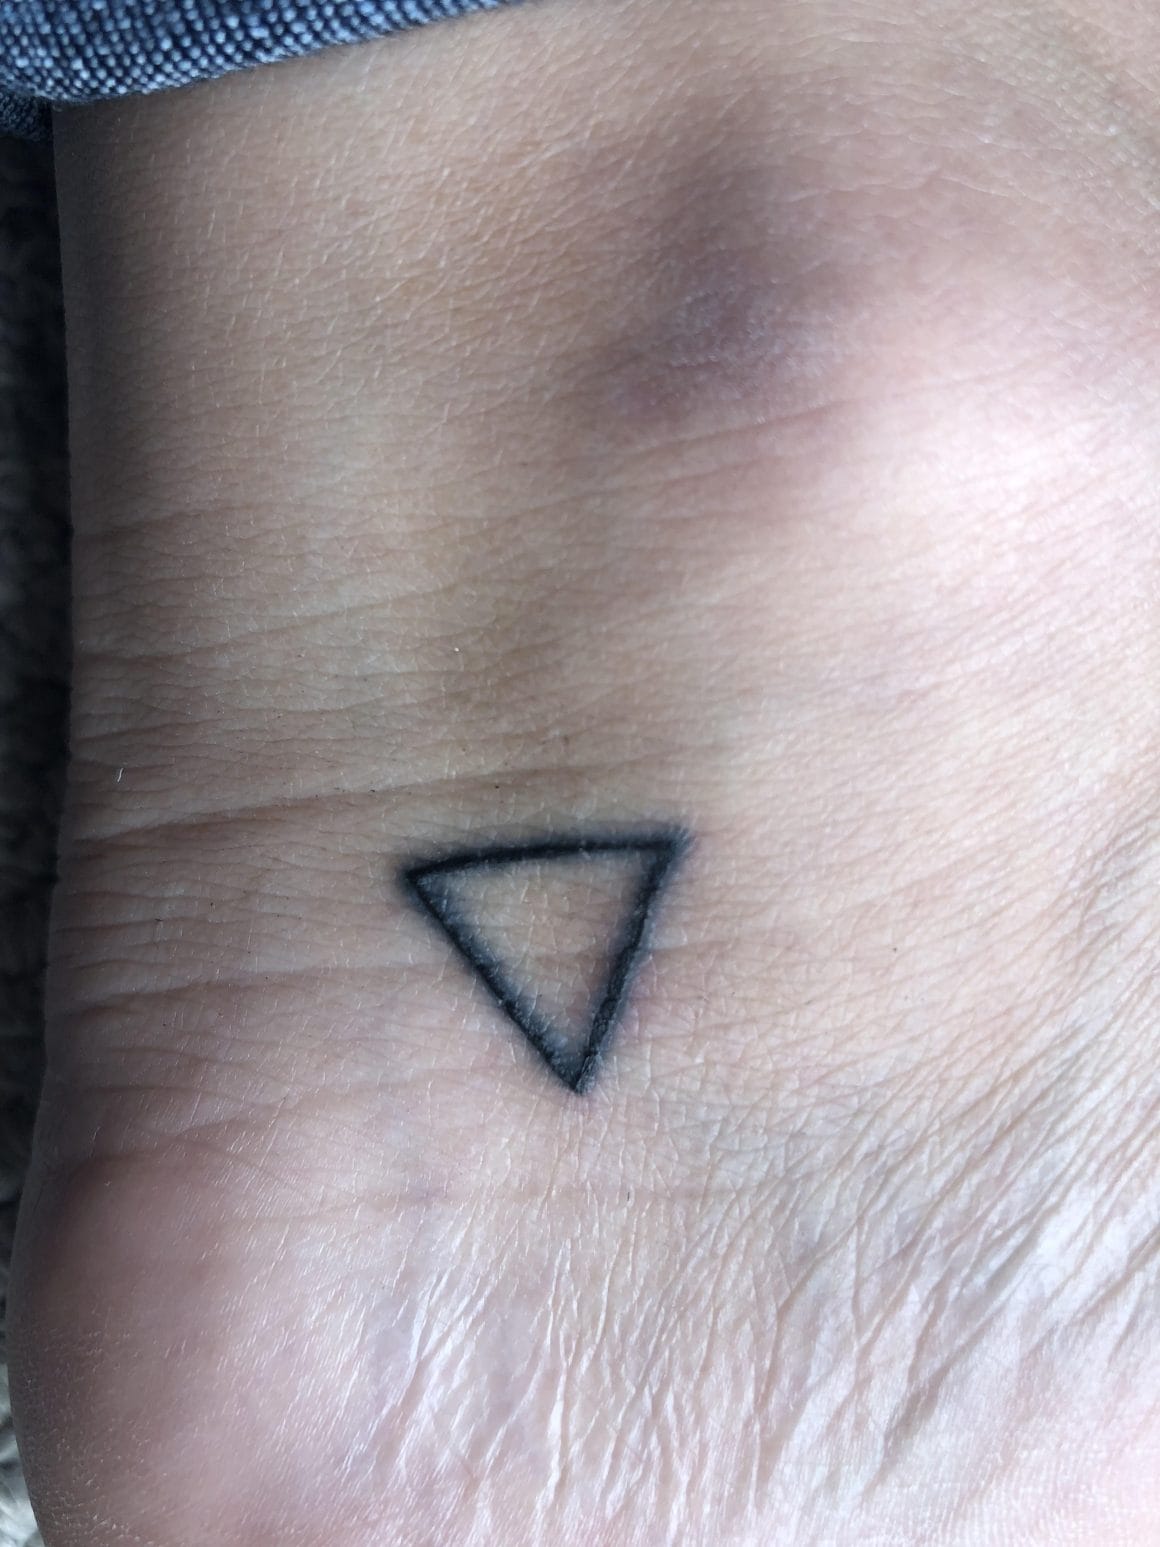 My first skin on my tattoo is leaking, what do I do? I just got this today.  (Pic from earlier, can feel it leaking now) : r/TattooDesigns